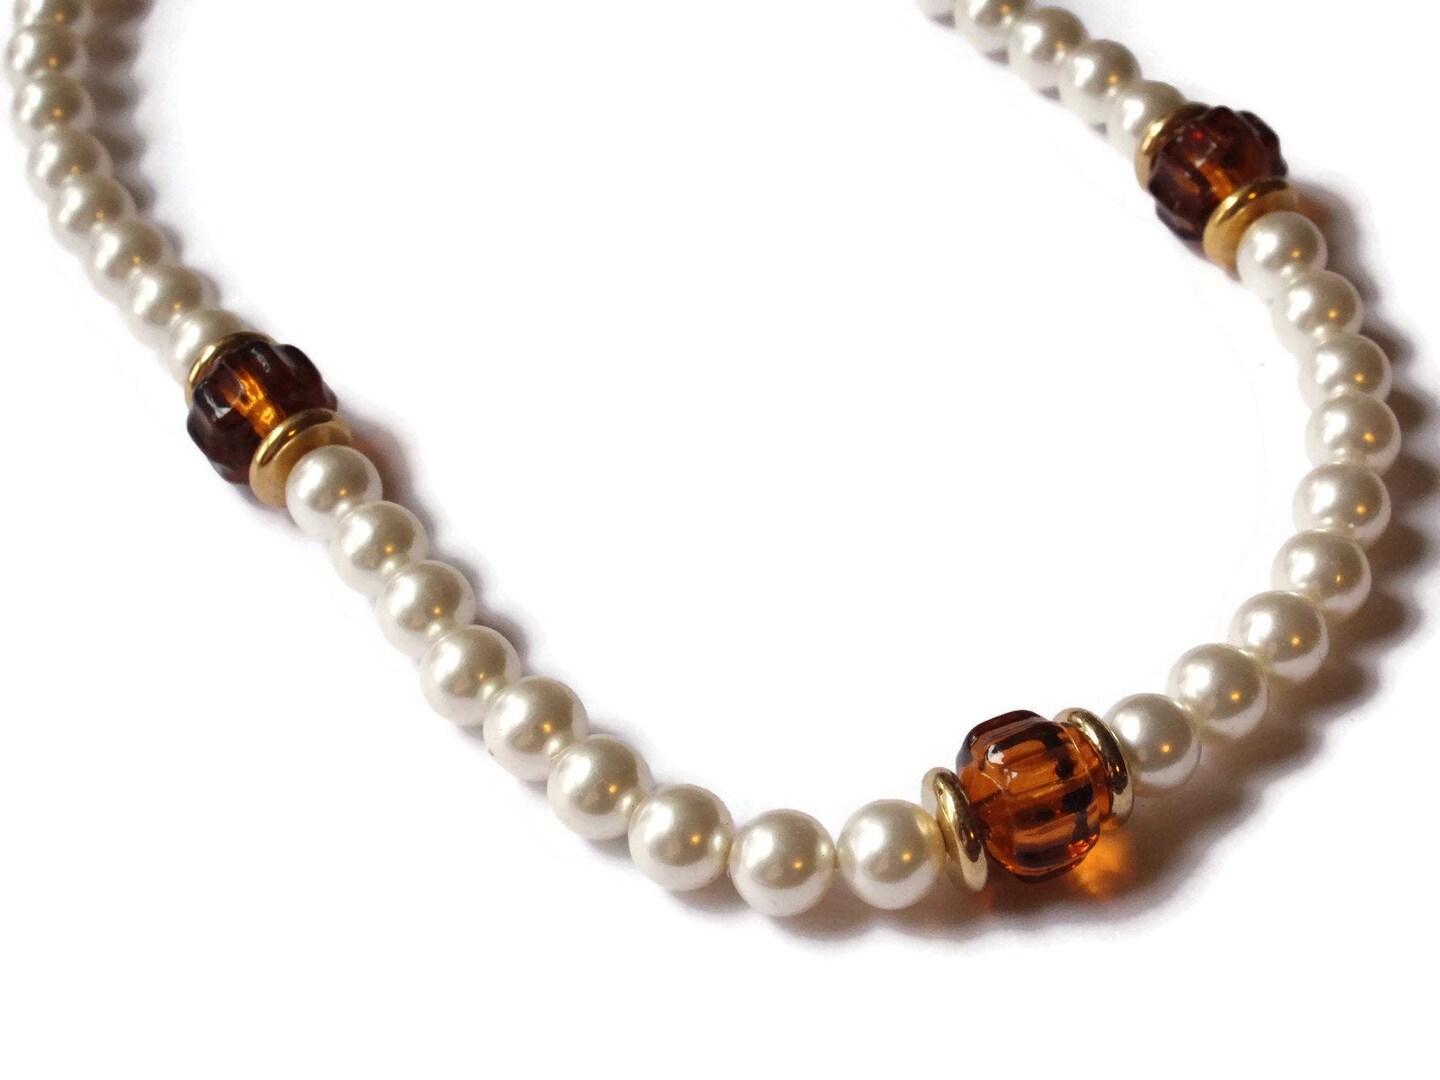 17 Inch Pearl and Brown Bead Vintage Necklace Beaded Princess Necklace